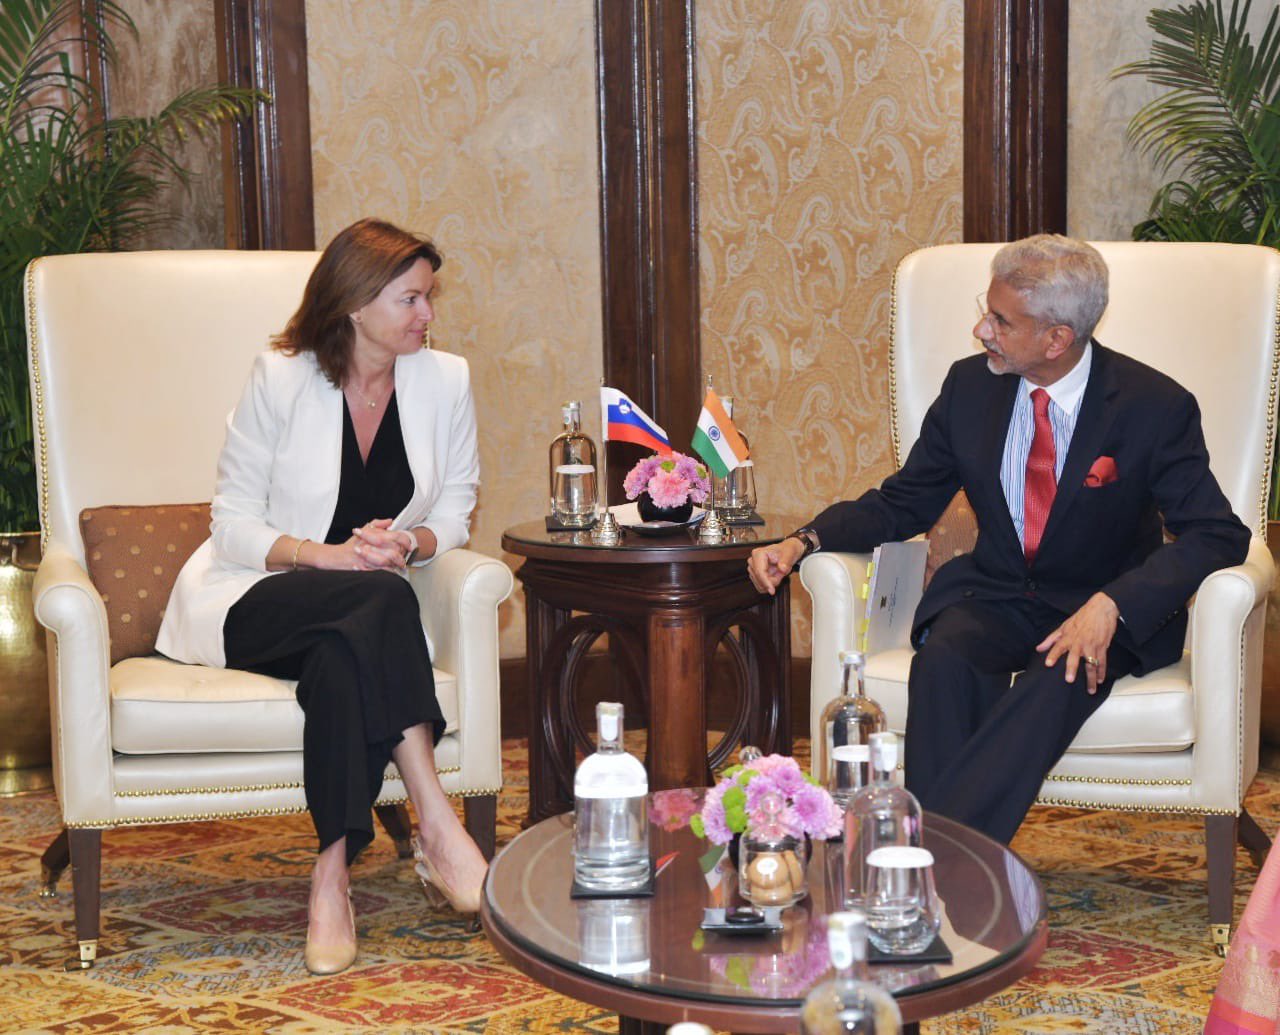 External Affairs Minister Dr S. Jaishankar met H. E. Tanja Fajon, Minister of Foreign and European Affairs of the Republic of Slovenia, on the sidelines of Raisina Dialogue 2023 in New Delhi on 3 March 2023